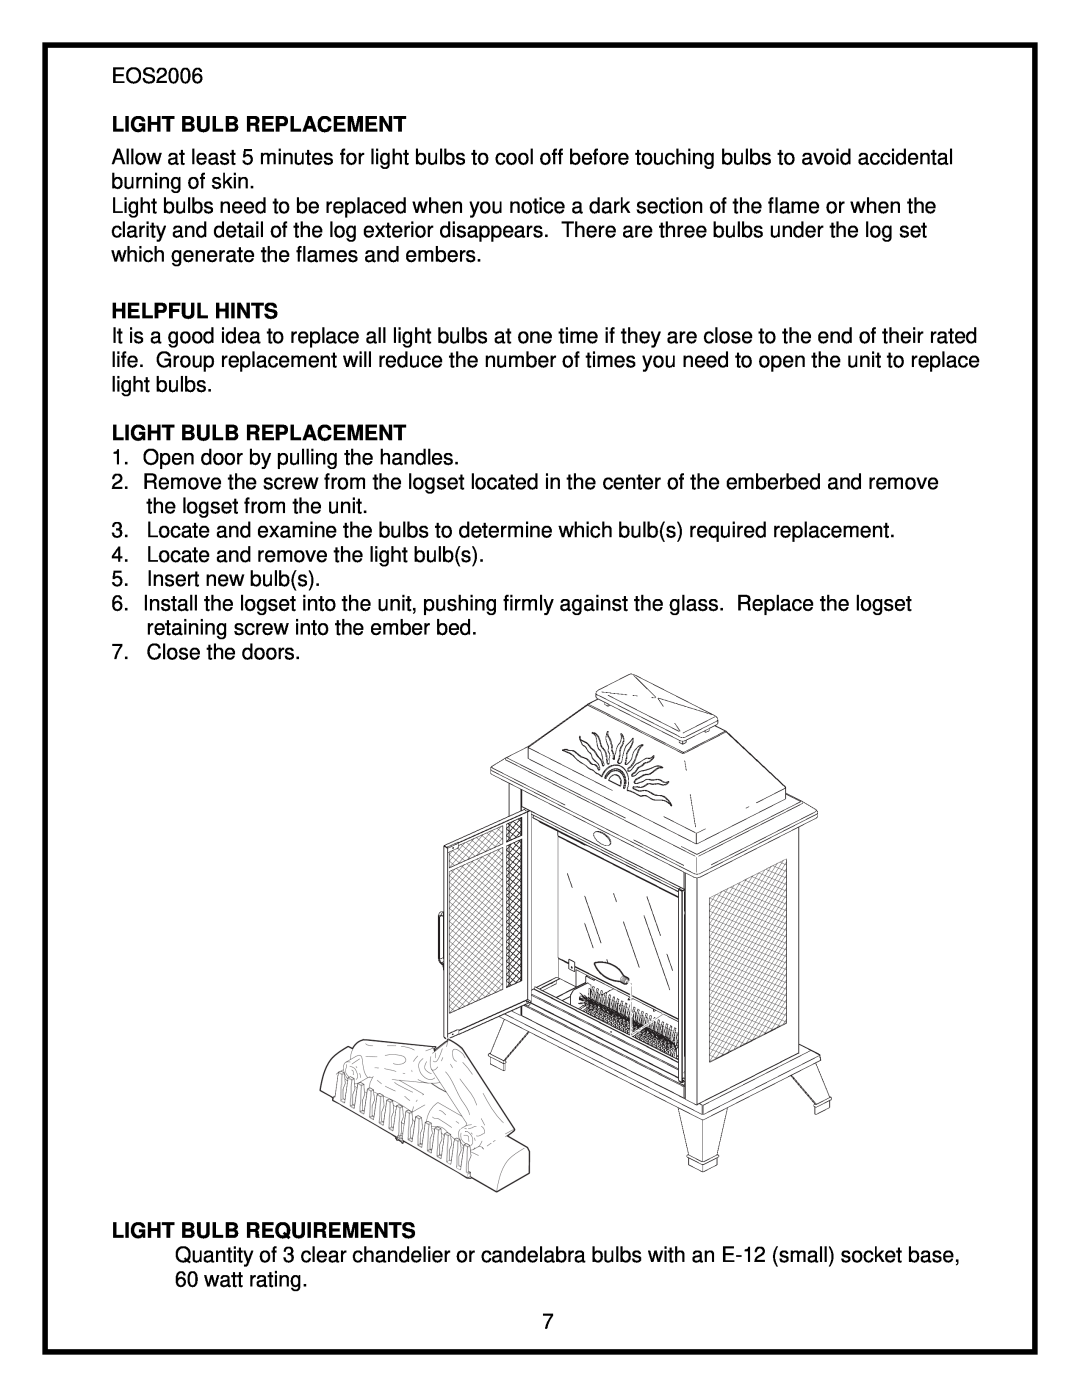 Dimplex EOS2006 service manual Light Bulb Replacement, Helpful Hints, Light Bulb Requirements 